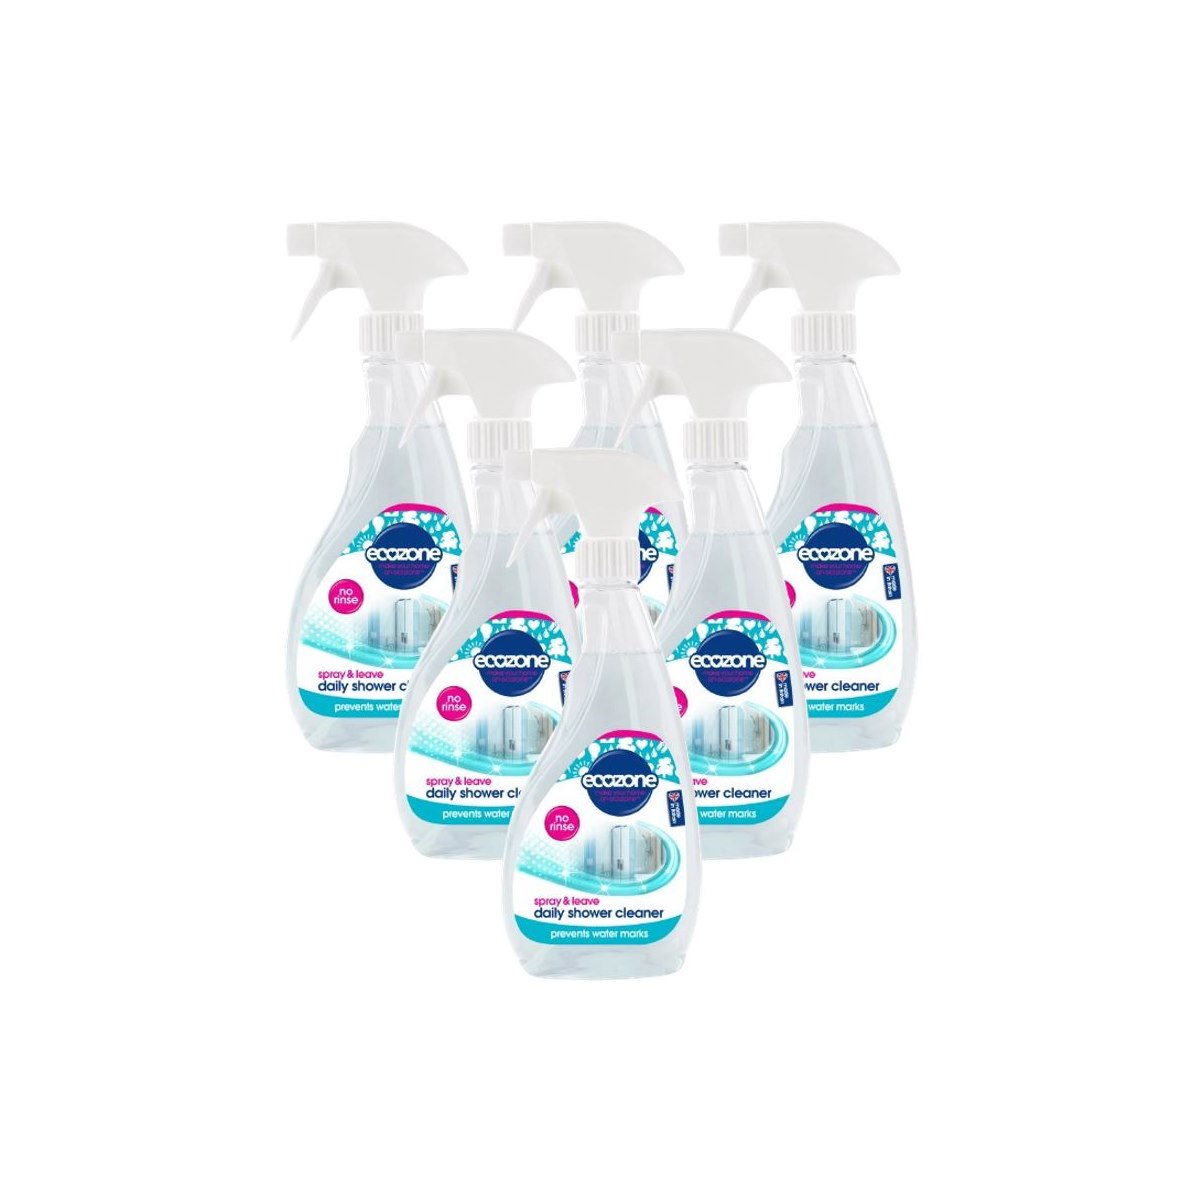 Case of 6 x Ecozone Spray and Leave Daily Shower Cleaner 500ml 